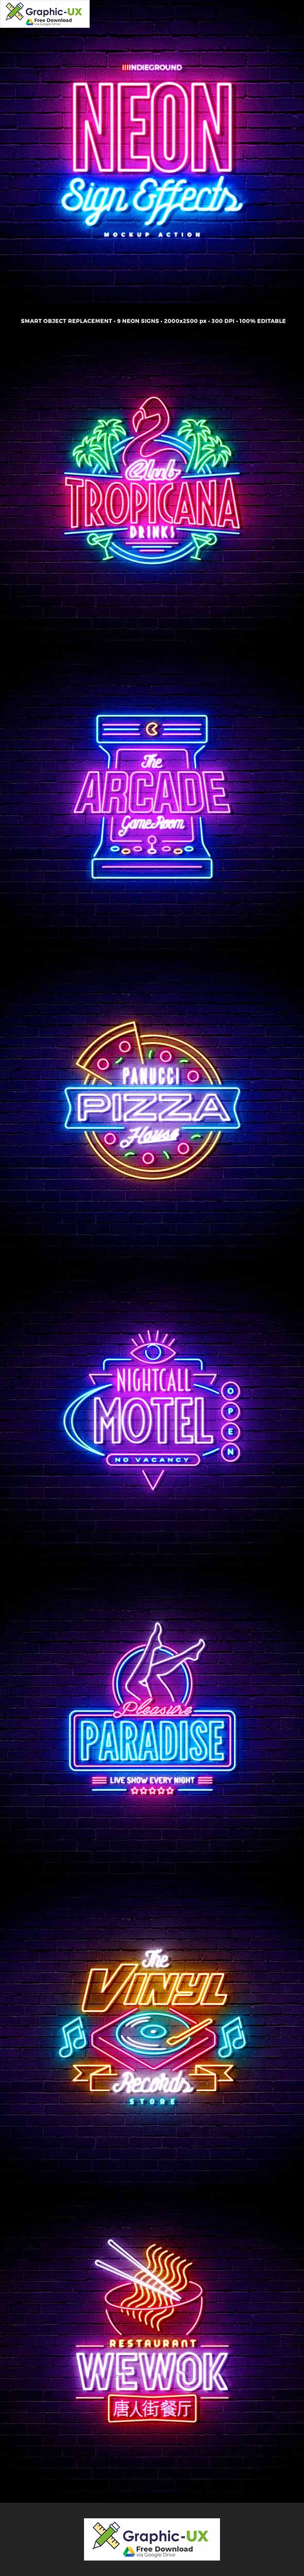 Neon Sign Effects 